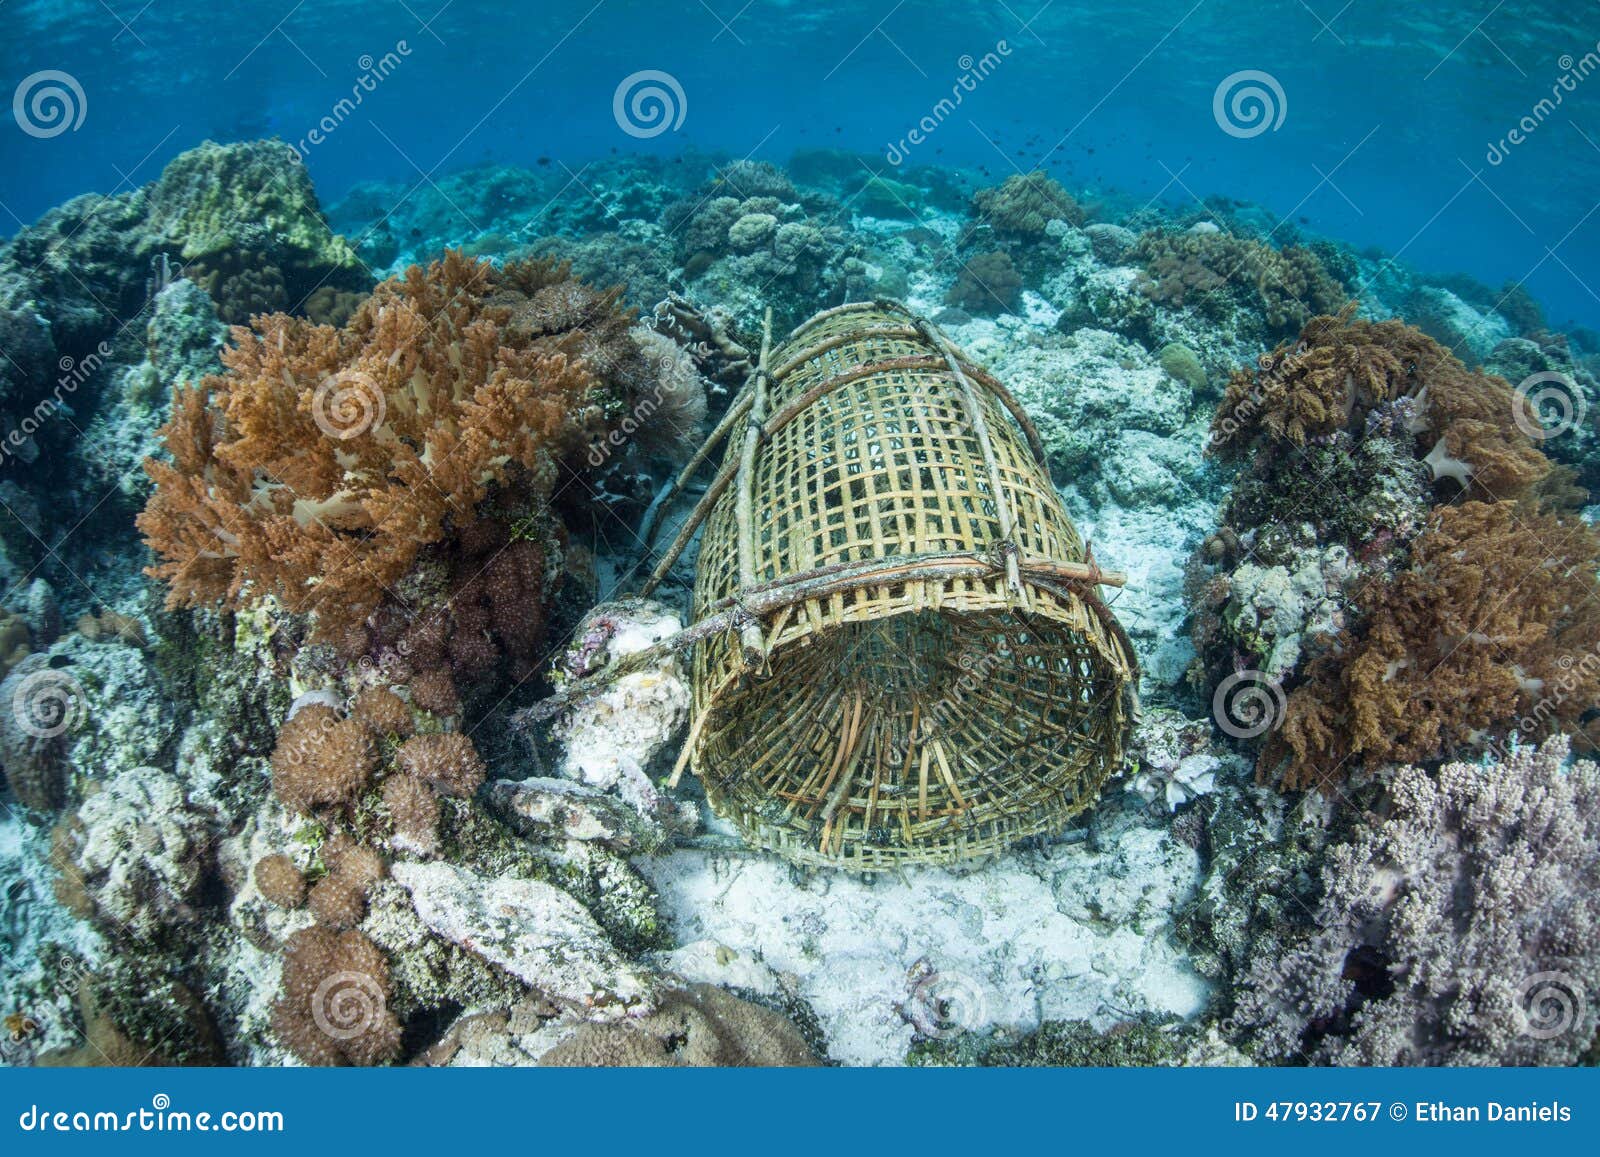 2,630 Underwater Fish Trap Images, Stock Photos, 3D objects